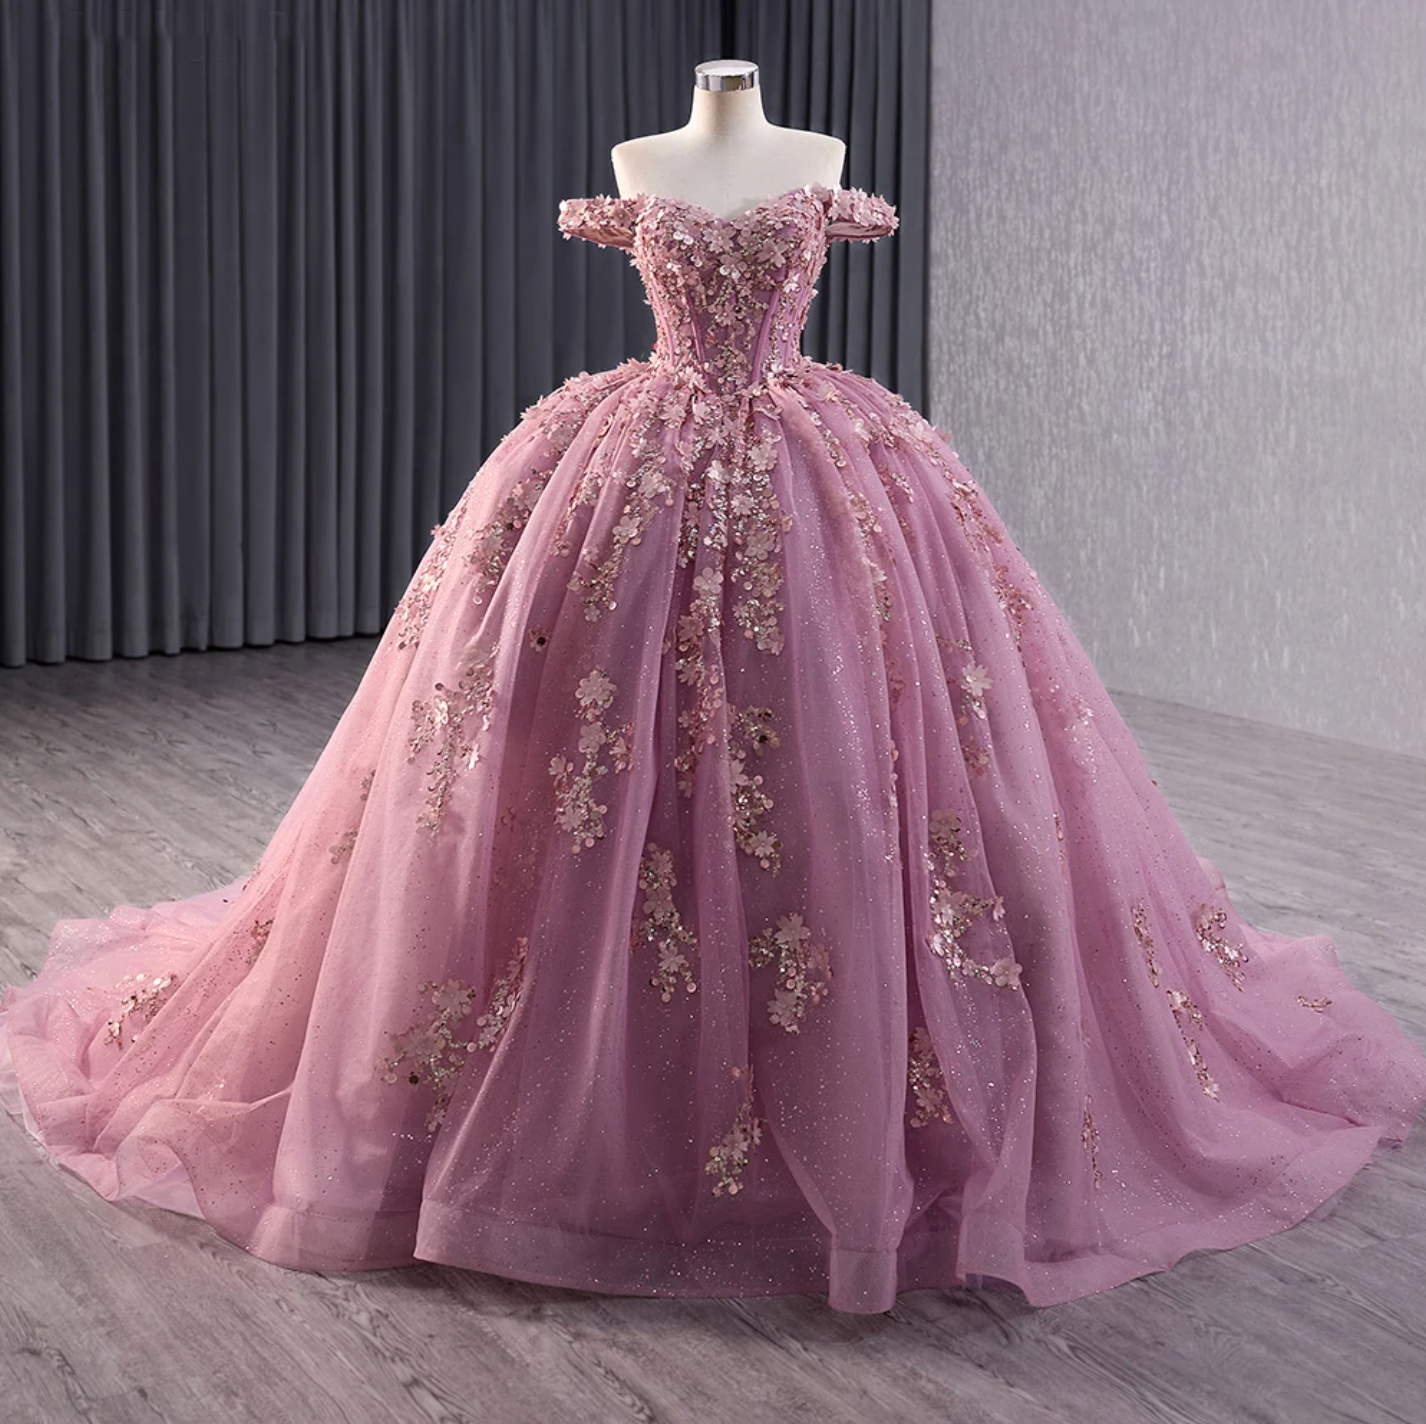 Floral Lace Sweetheart Corset Style Party Ball Gown Quinceañera Dress